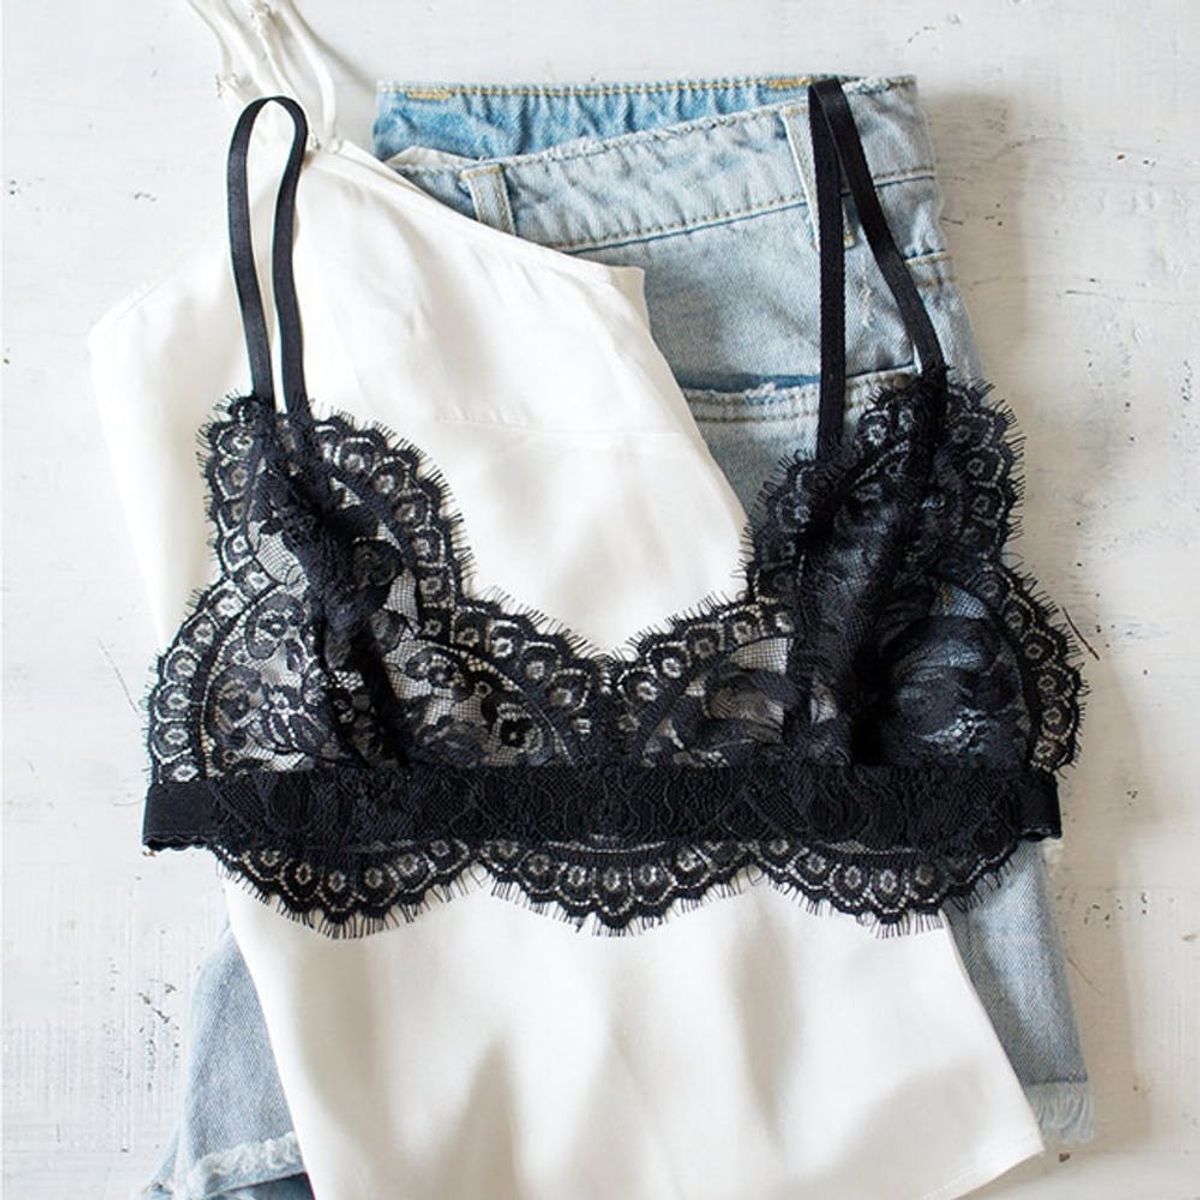 What to Make This Weekend: A Lace Bralette, Marquee Cake Topper + More